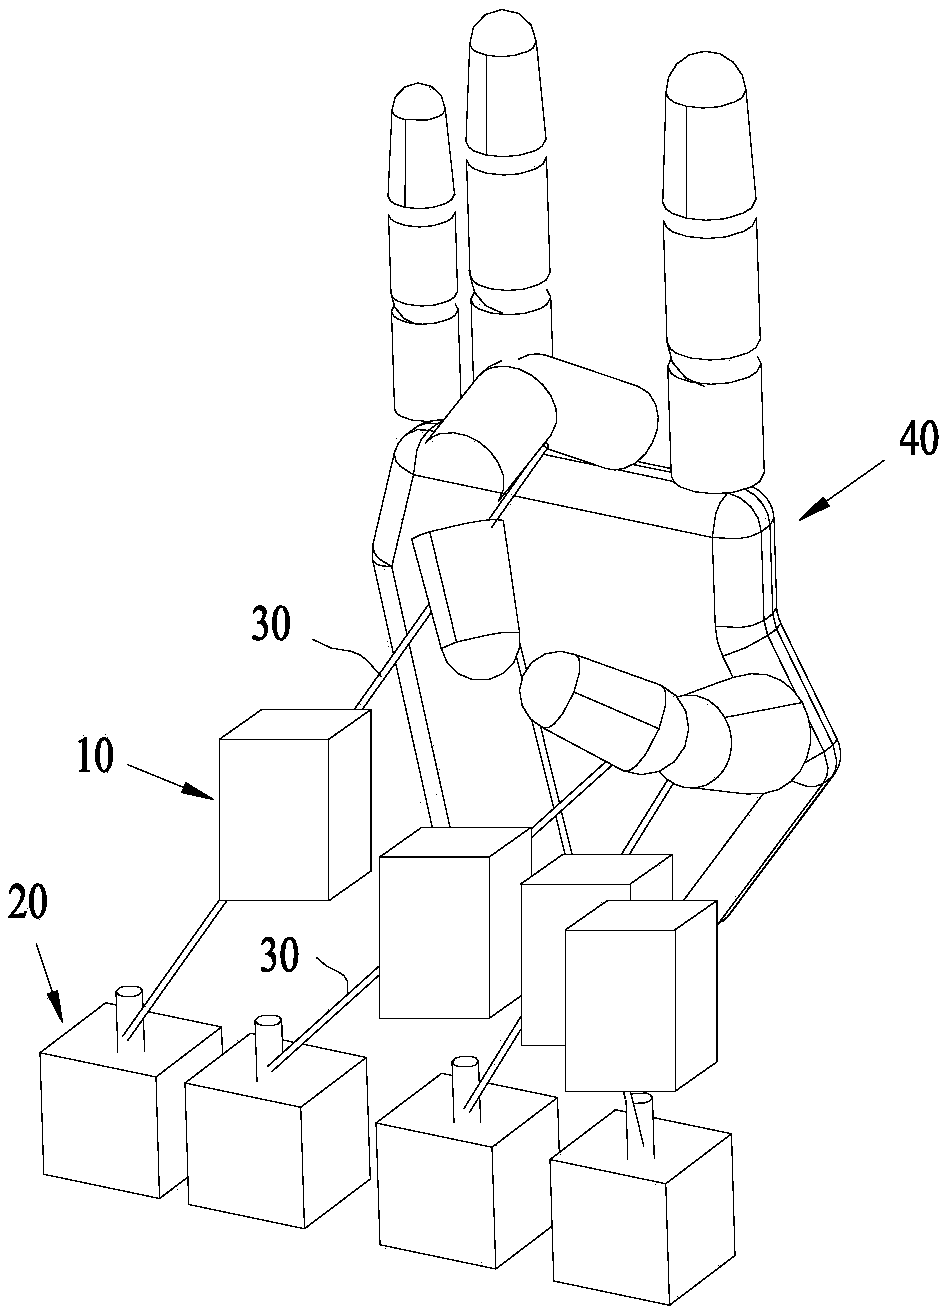 Motor control device applicable to flexible rehabilitation glove